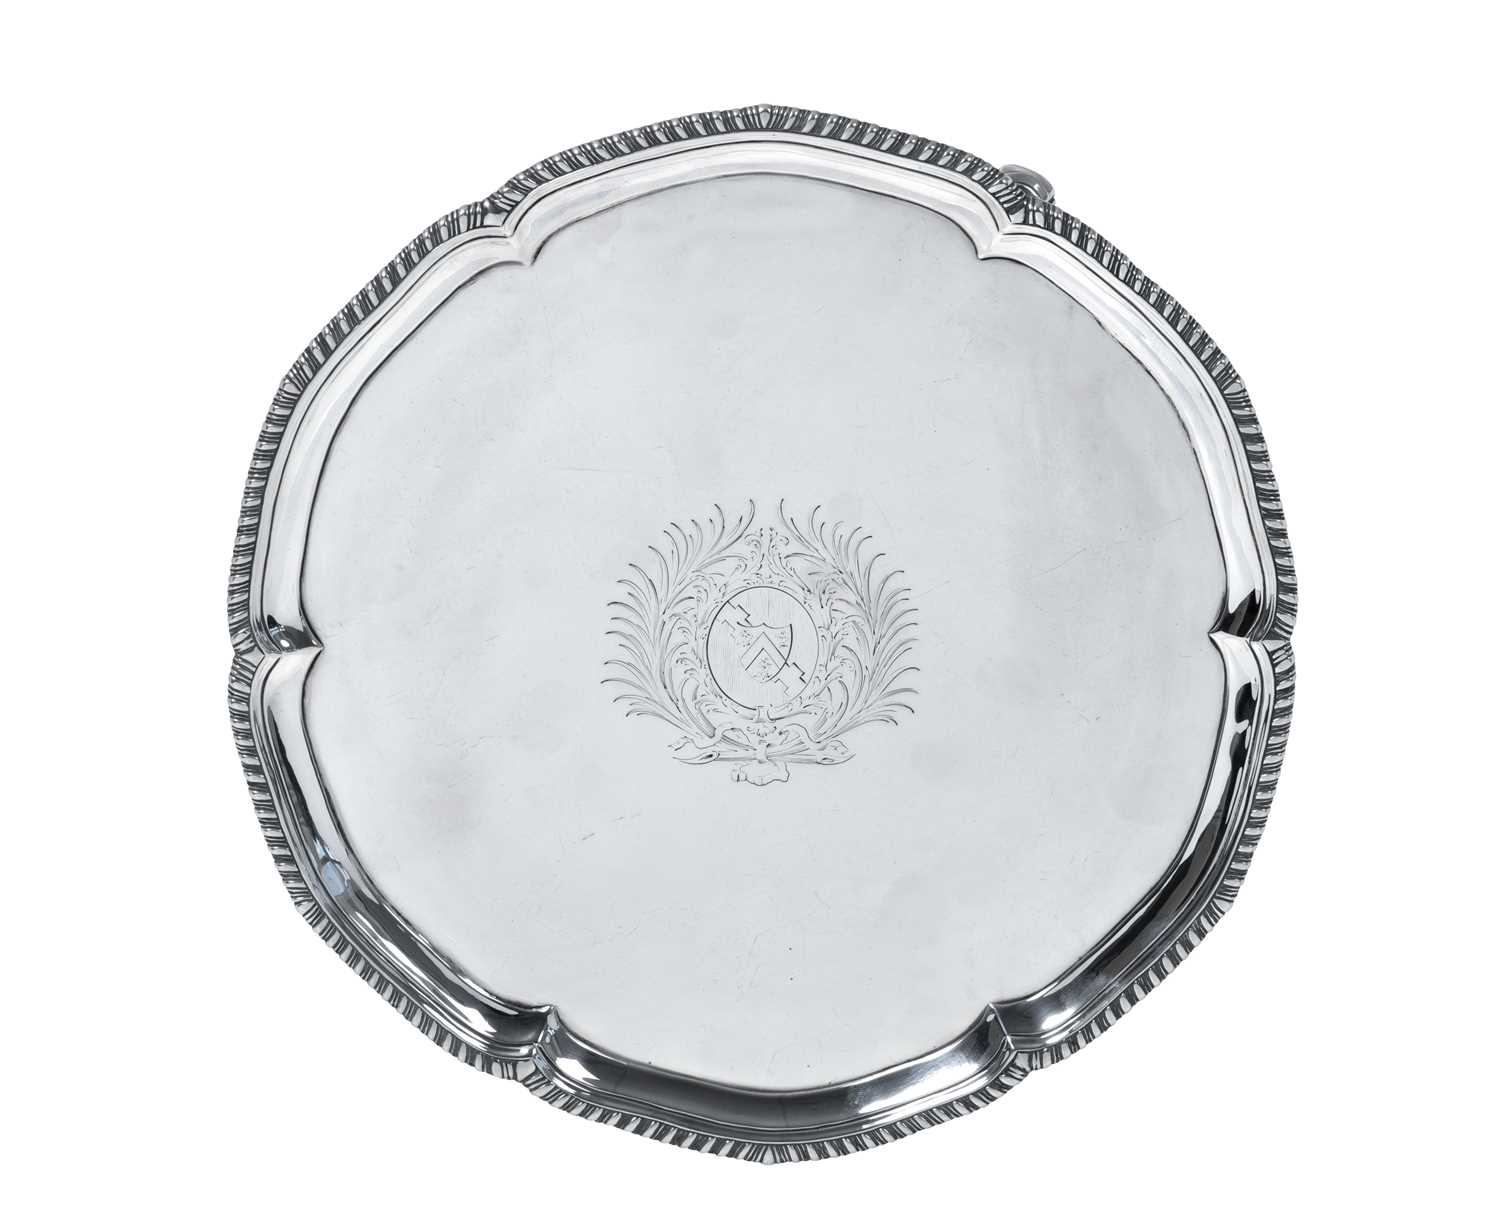 A George III Silver Salver, Probably by John Carter, London, 1768